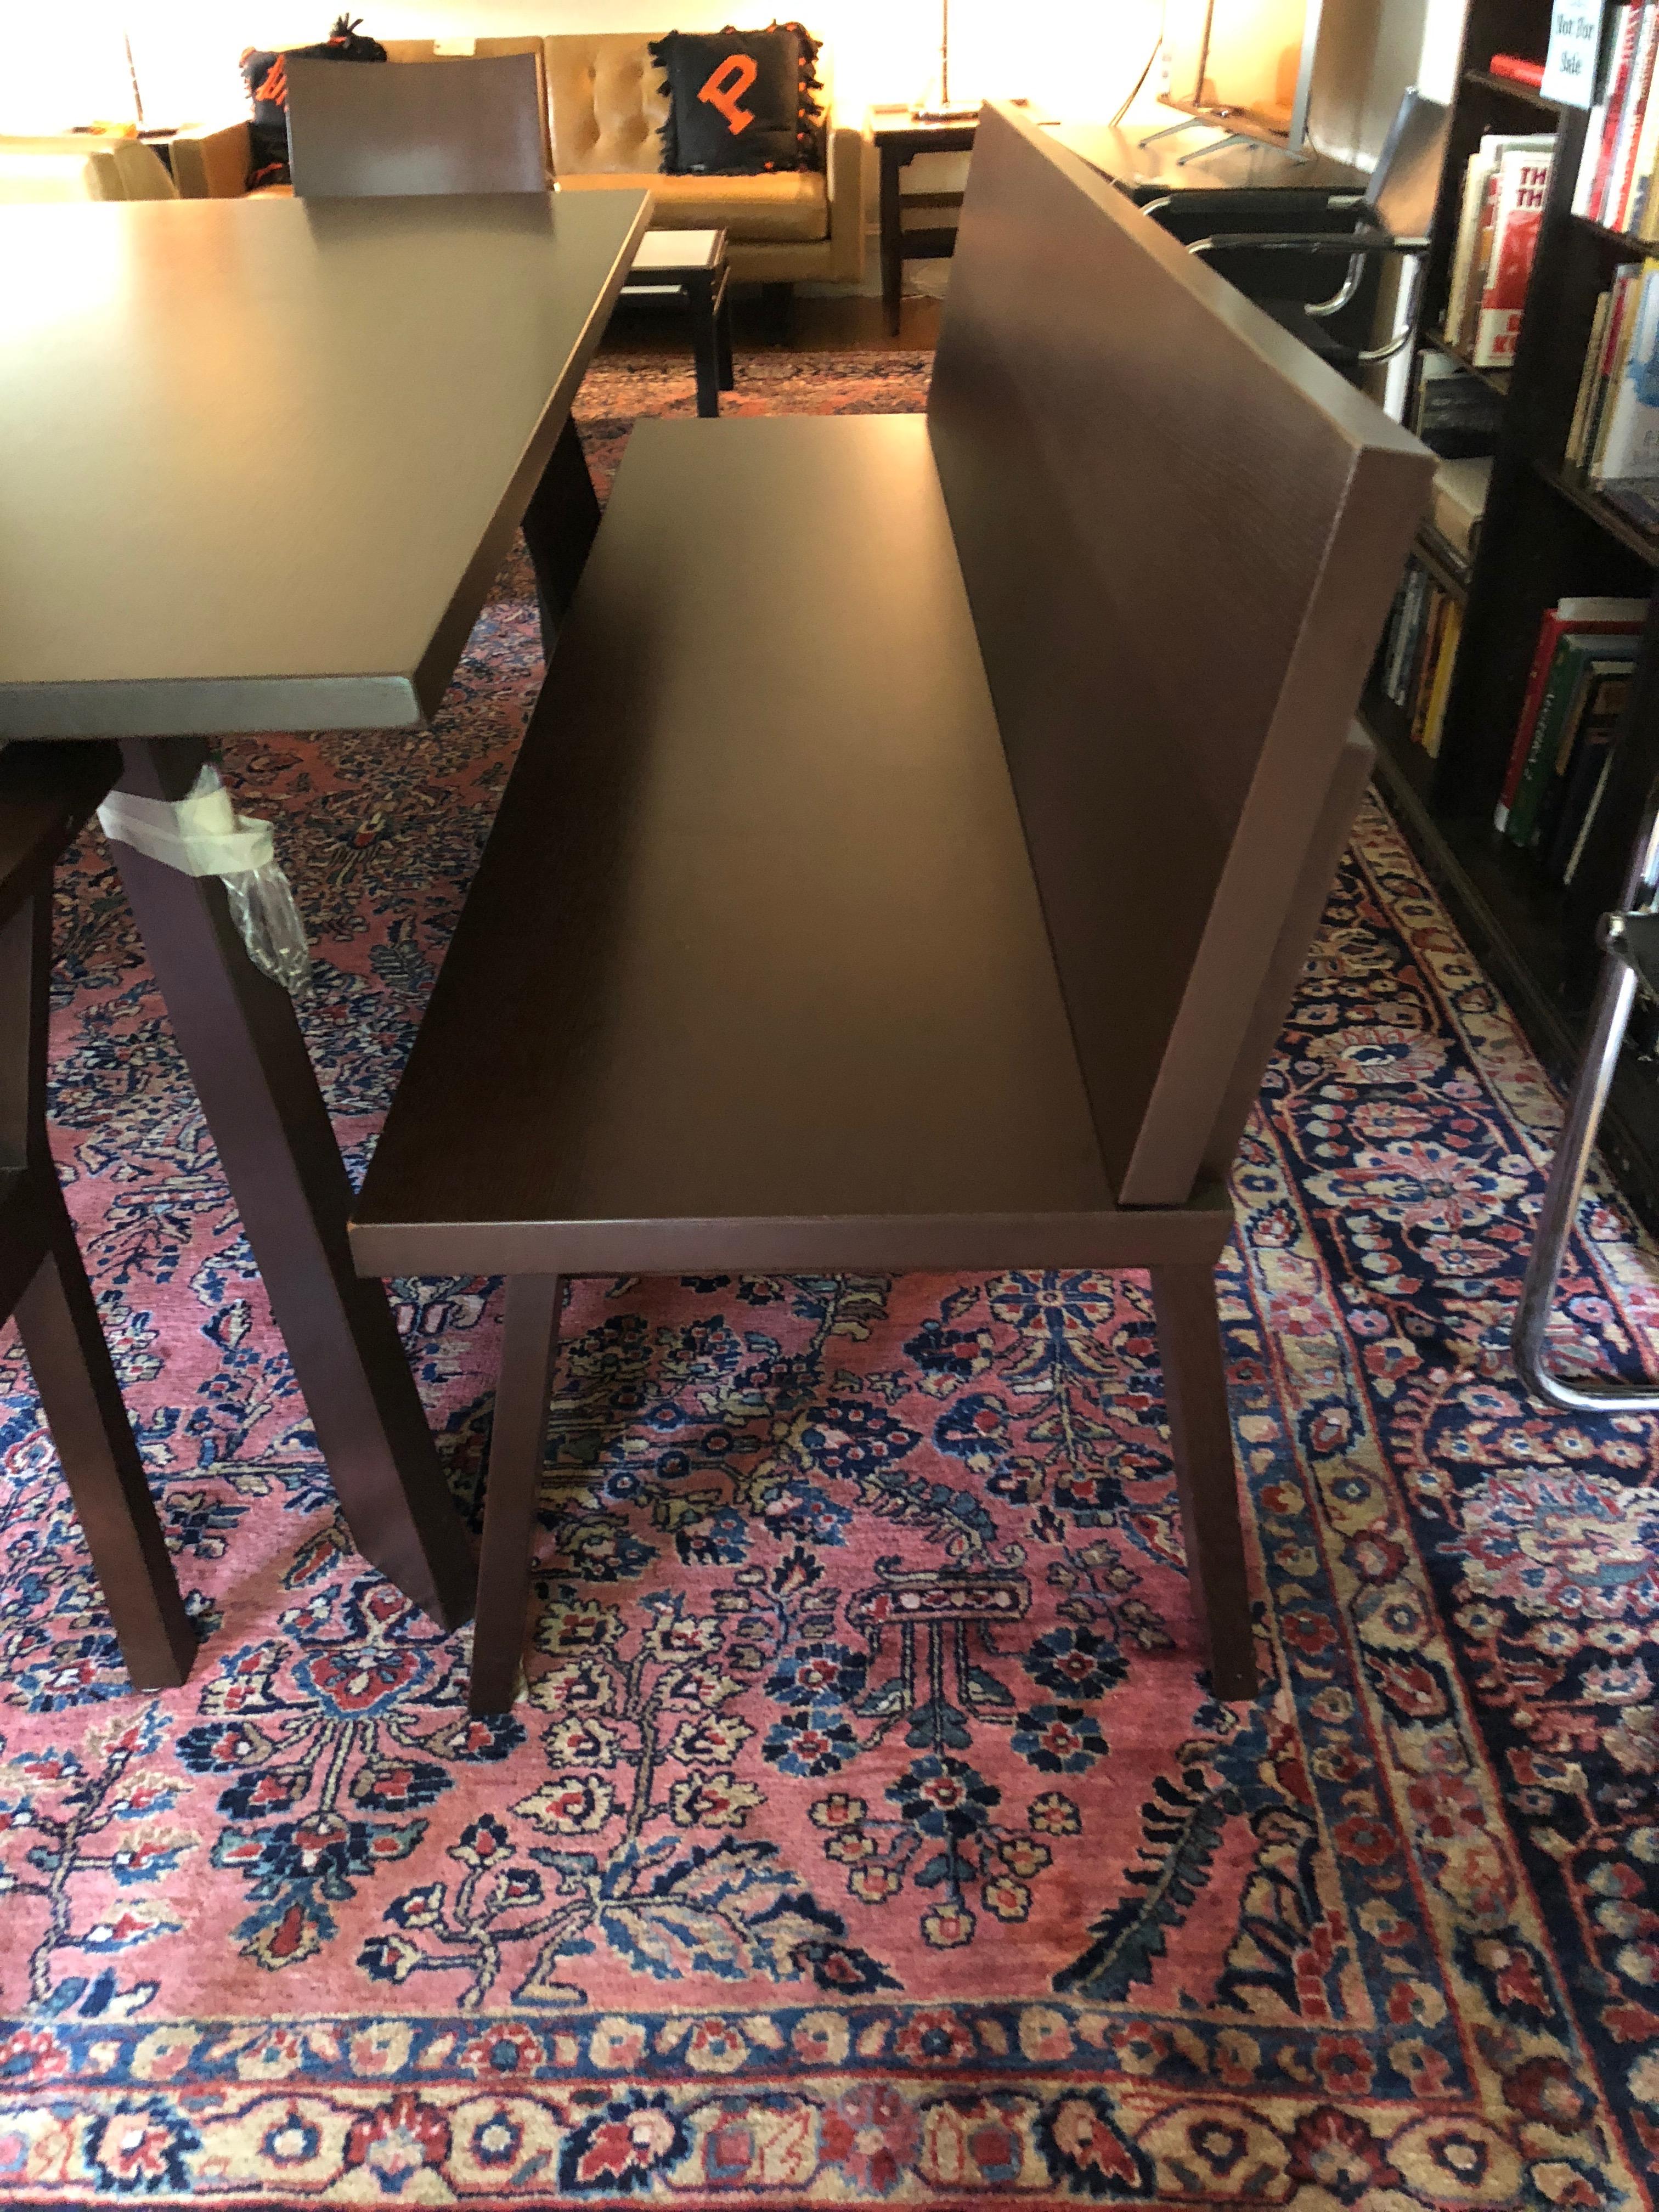 German Sophisticated Bulthaup Dining Table with Two Benches and Two Armchairs